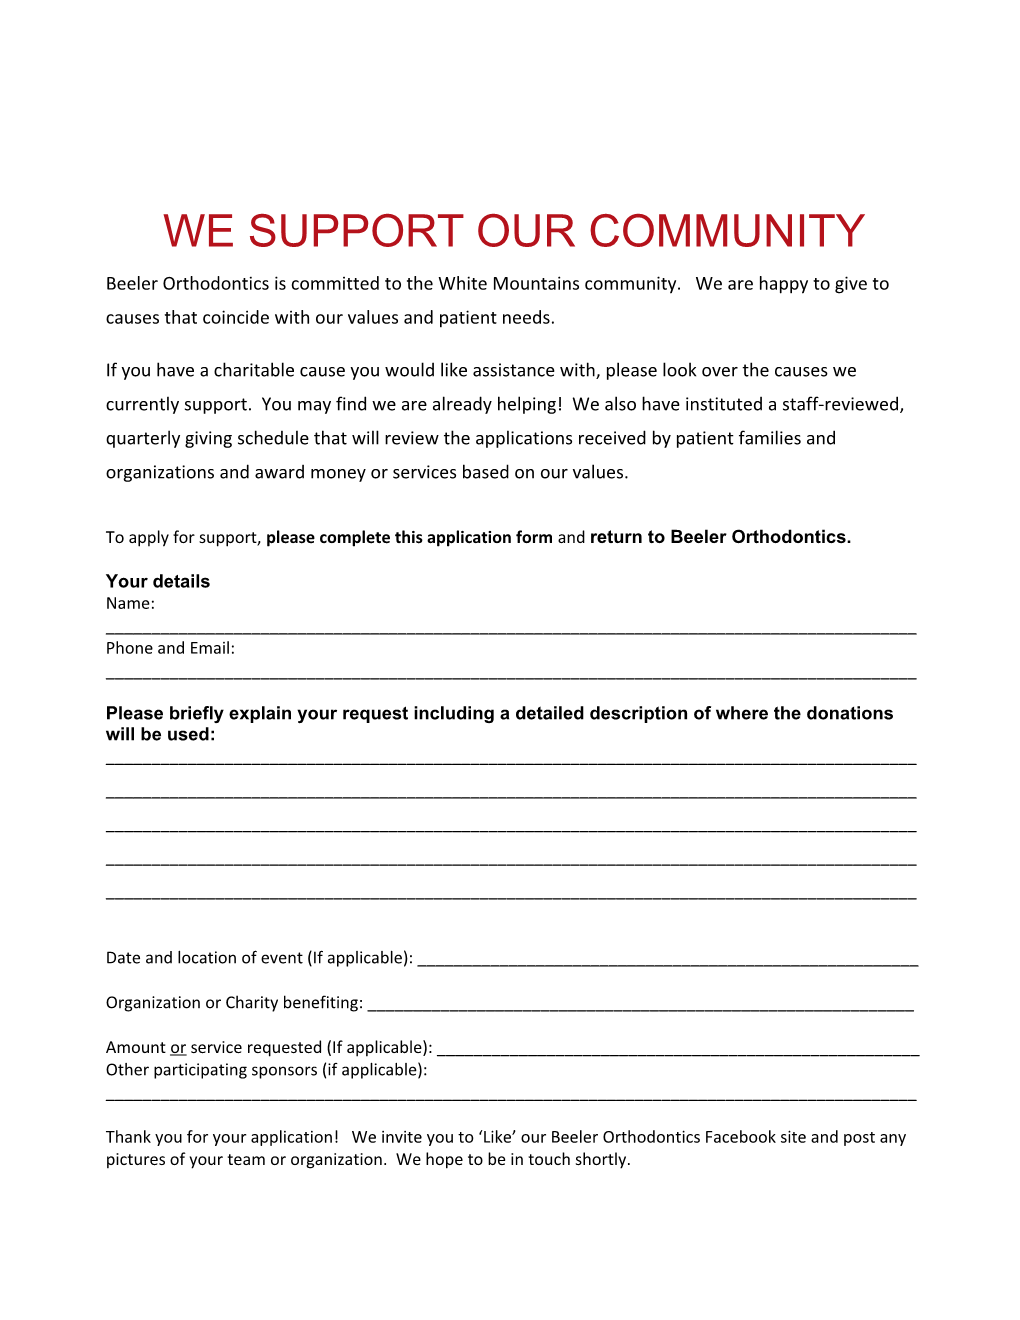 We Support Our Community